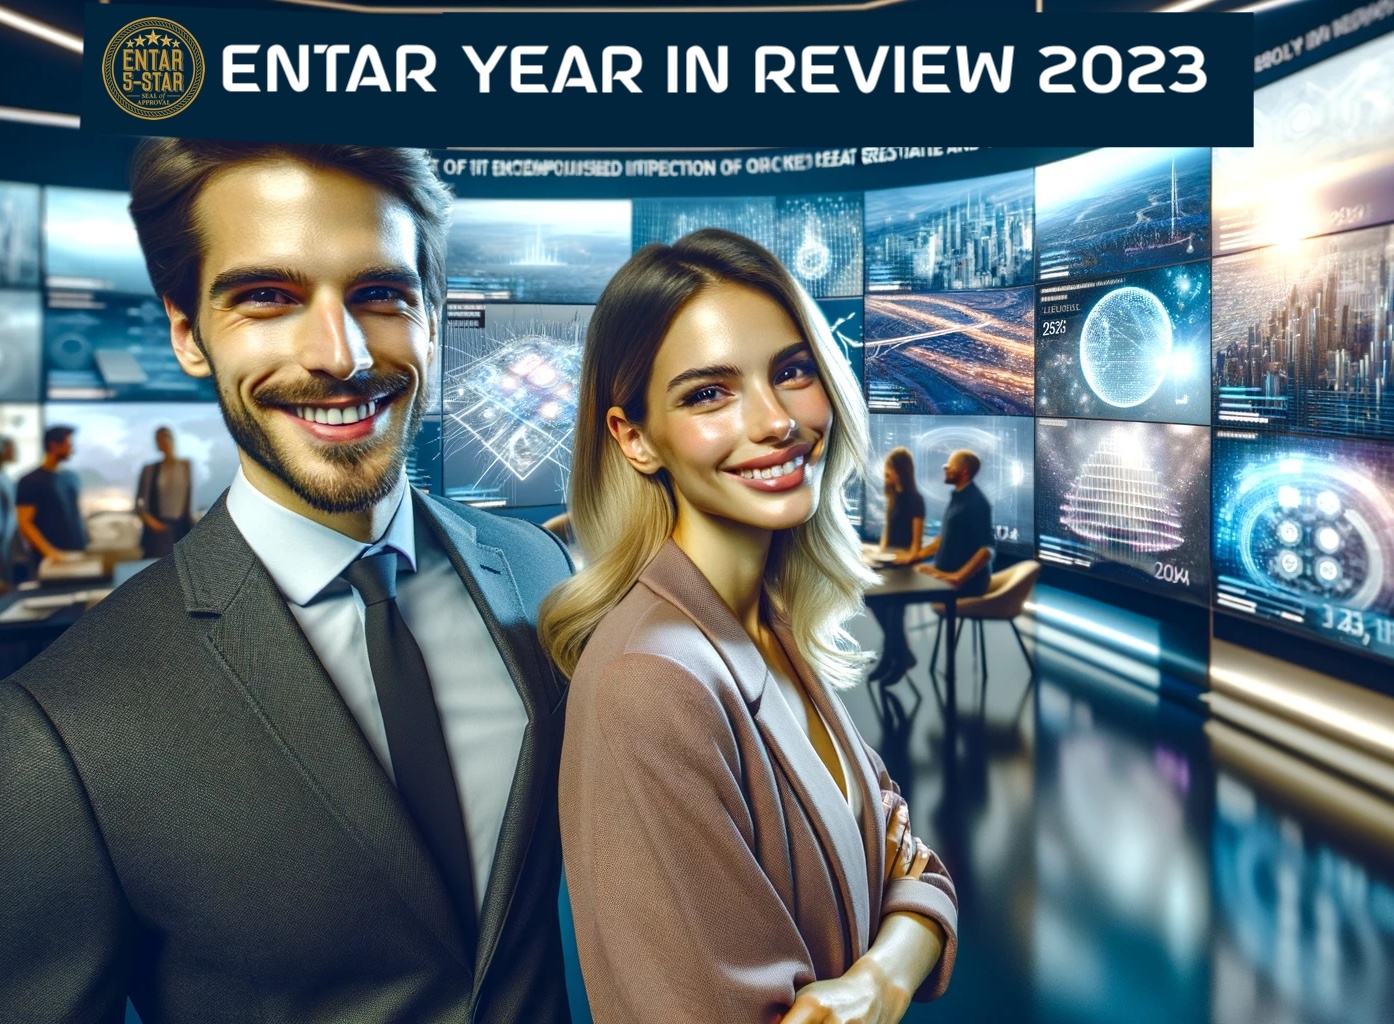 Entar year in review 2023